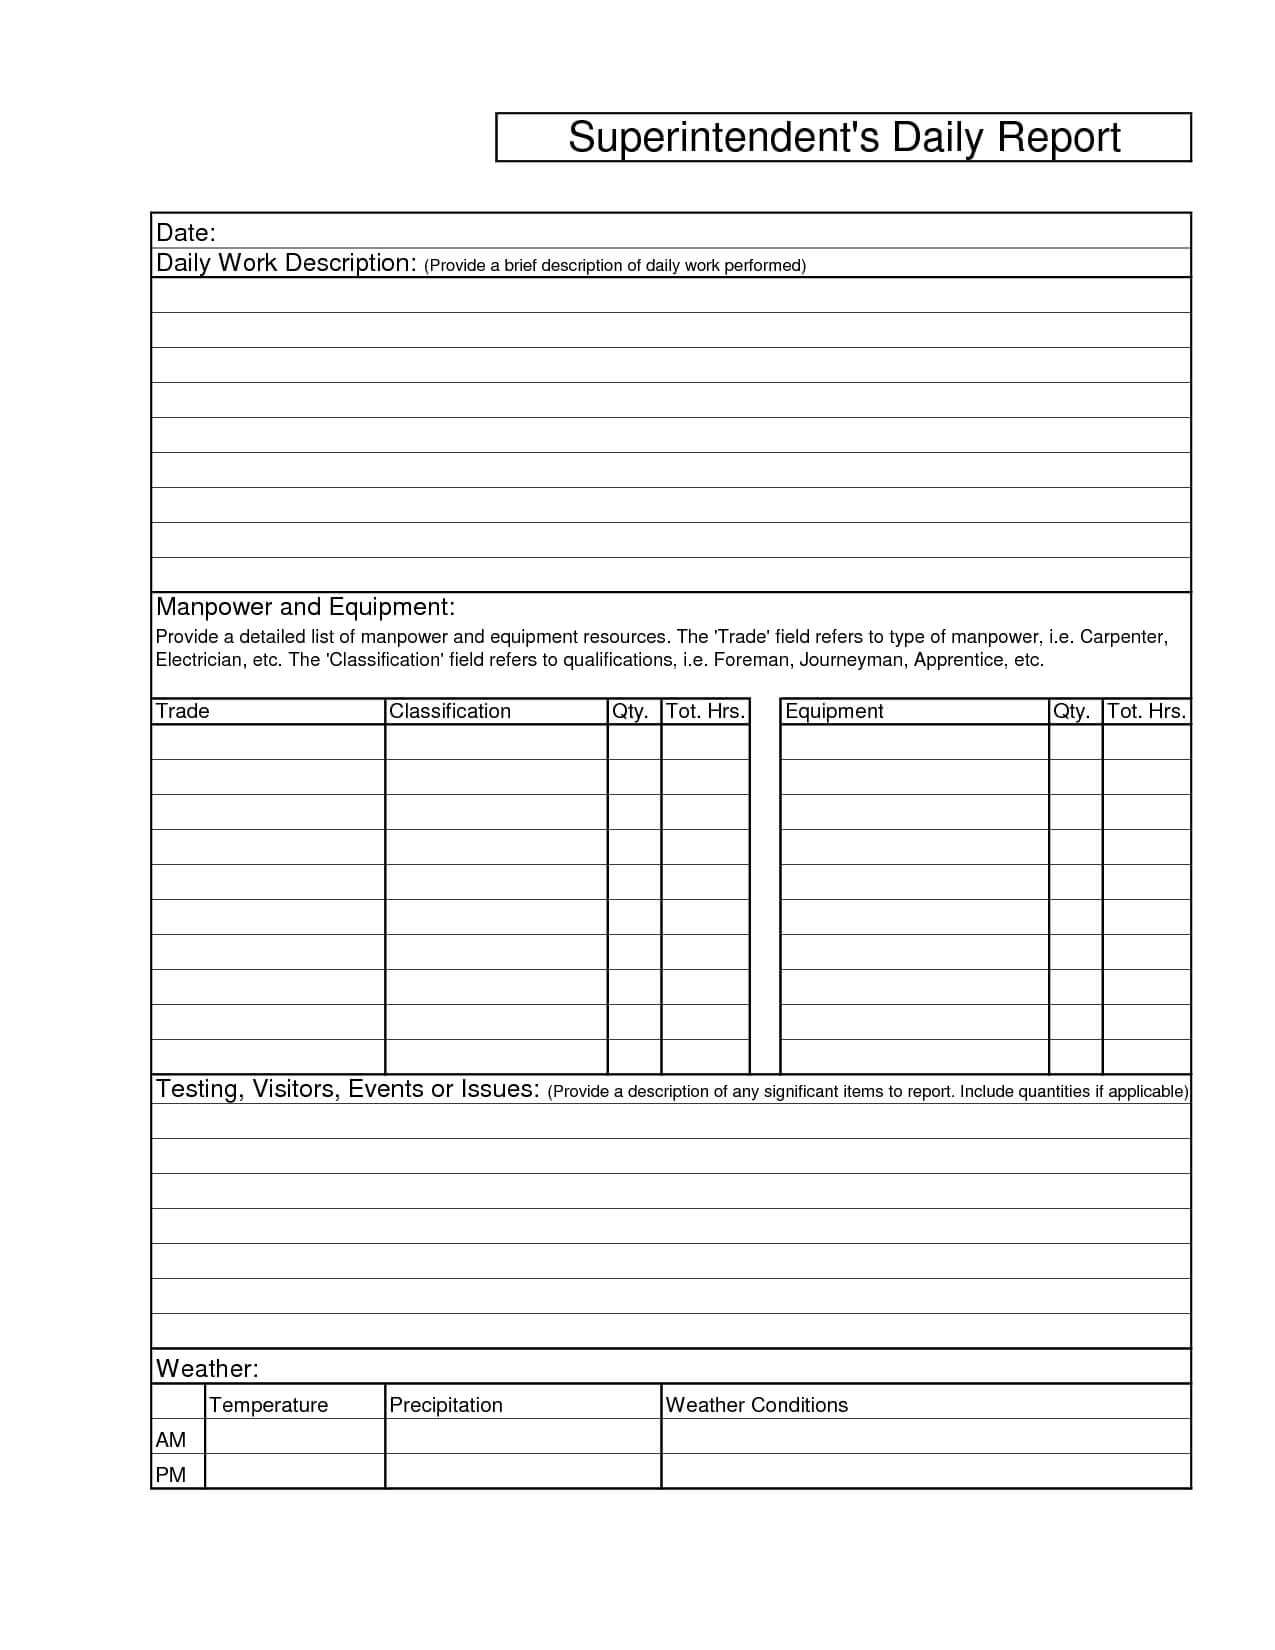 023 Template Ideas Business Printable Blank Superintendents For Superintendent Daily Report Template